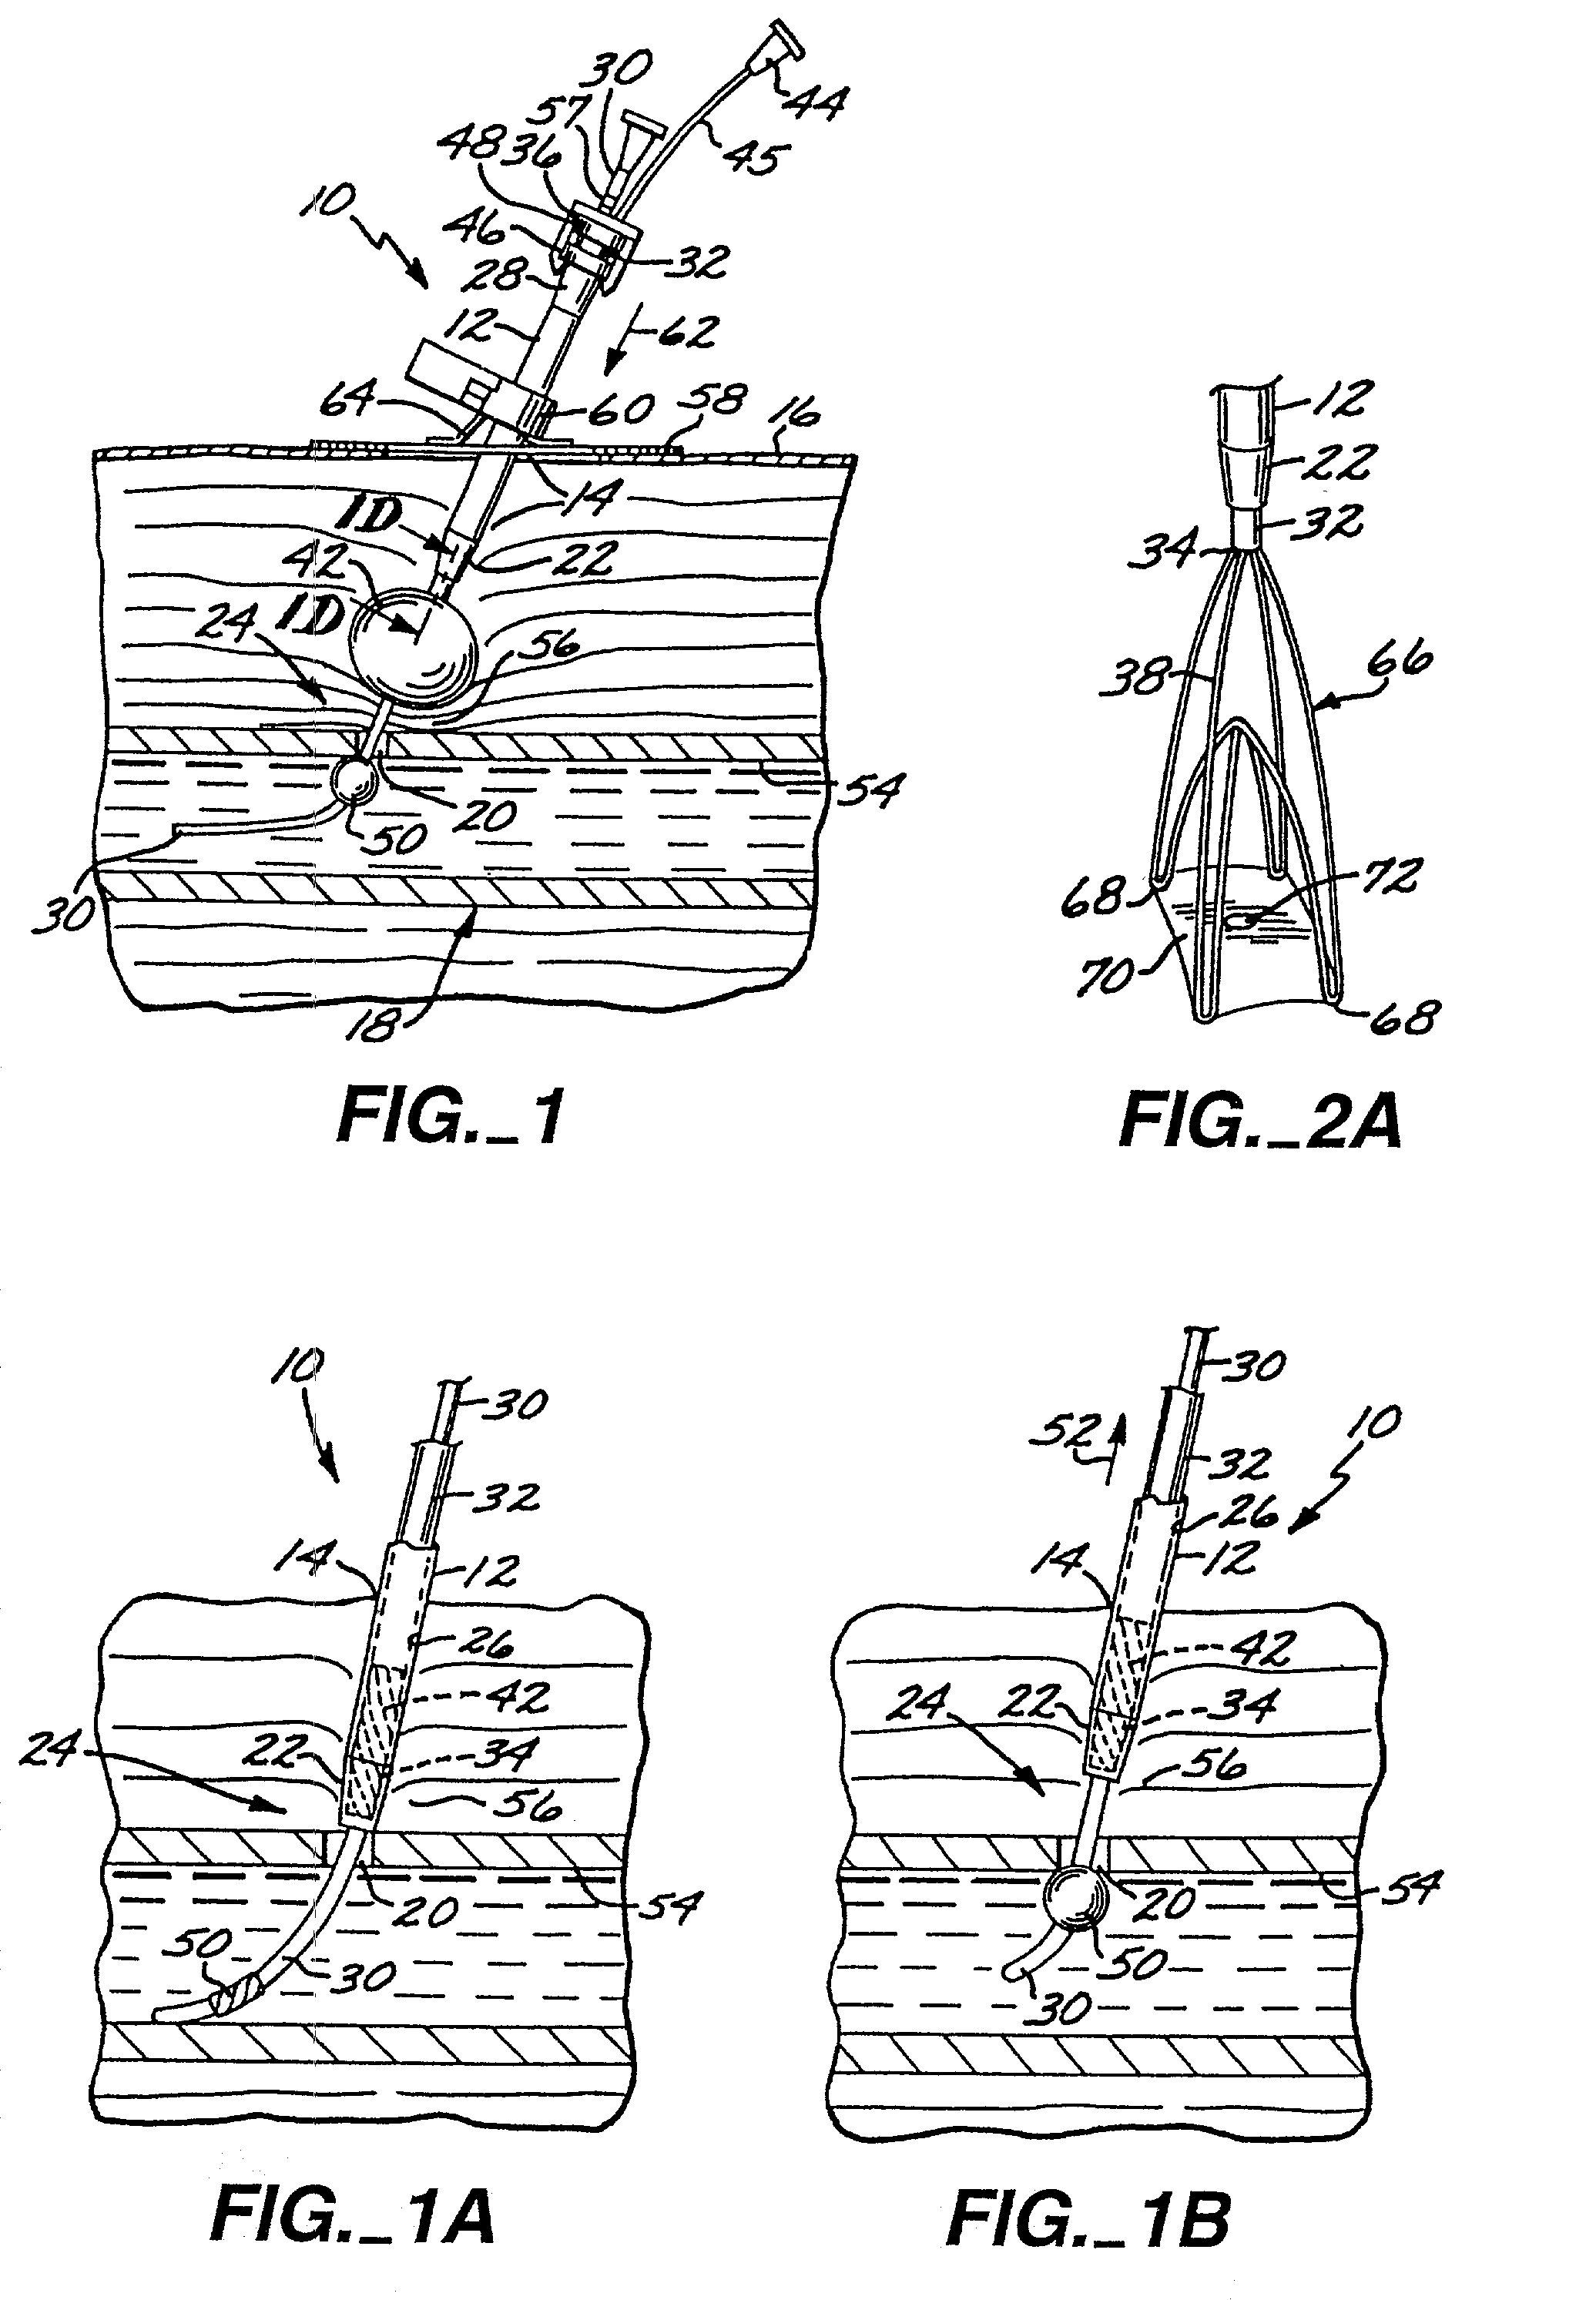 Apparatus and method for percutaneous sealing of blood vessel punctures